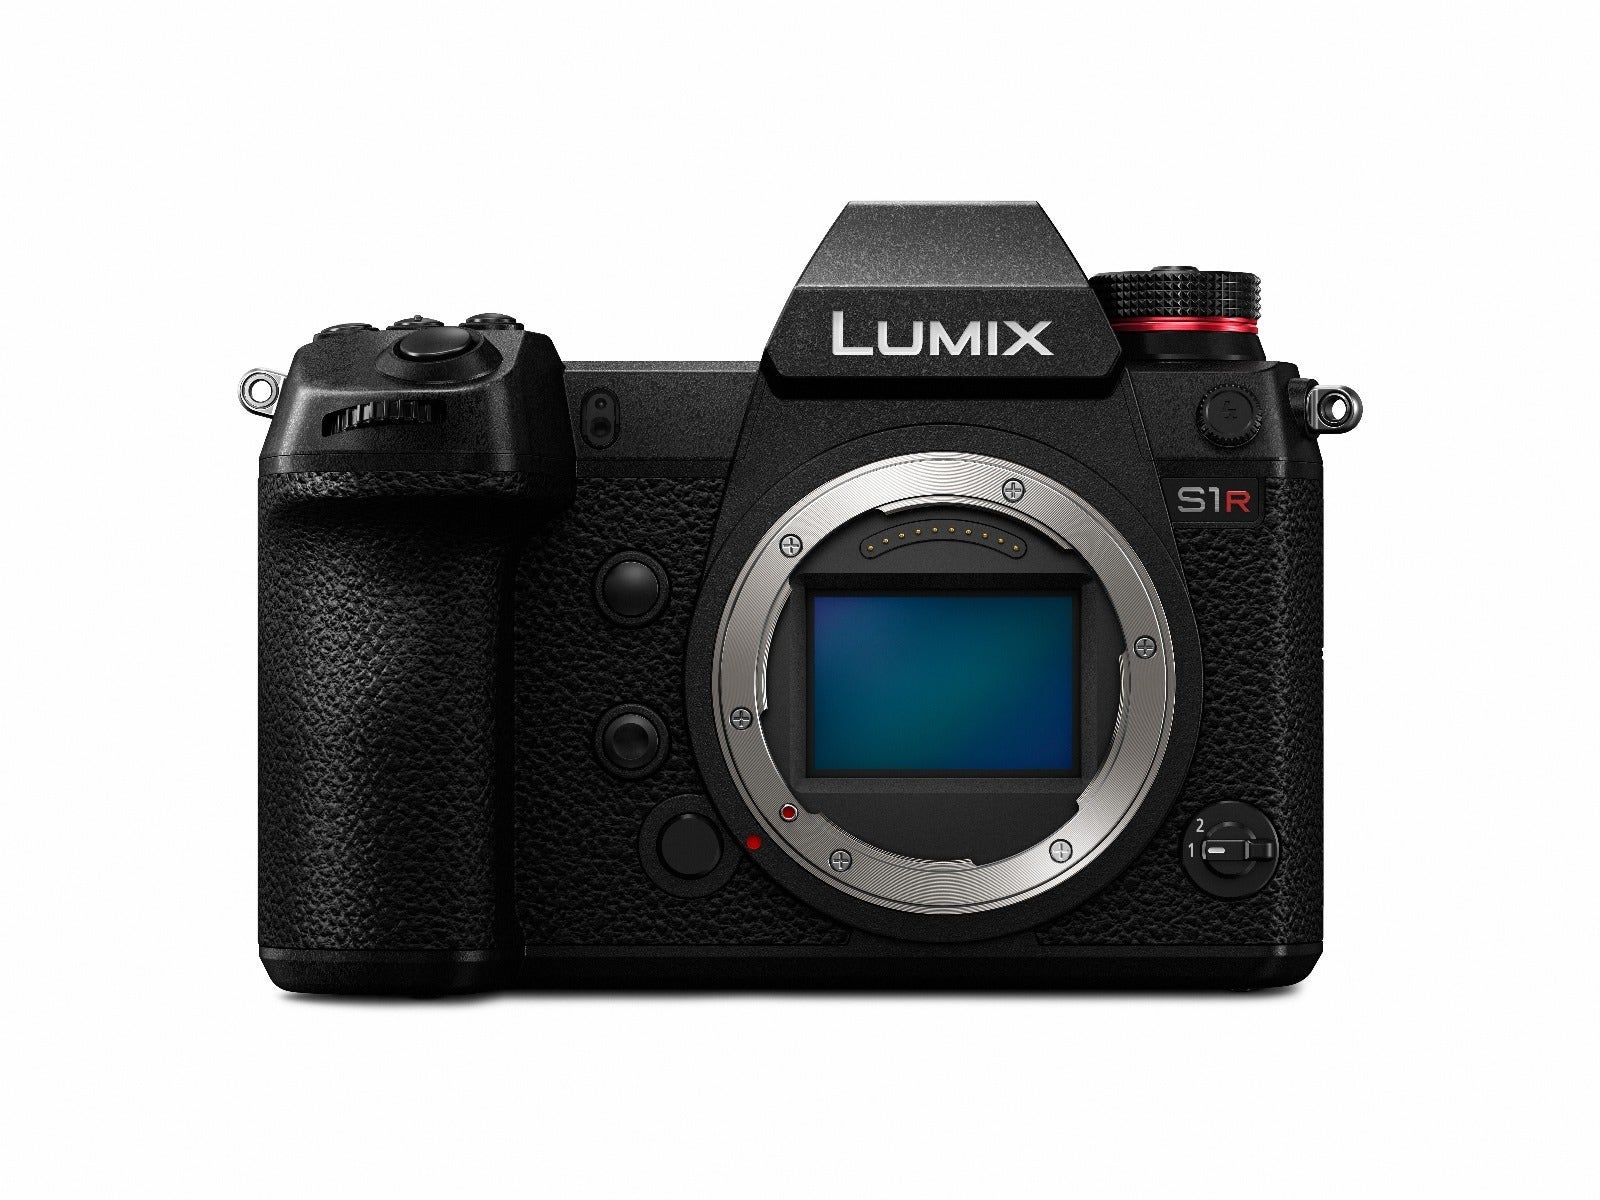 Image of Panasonic Lumix S1R Body Only Black Compact System Camera